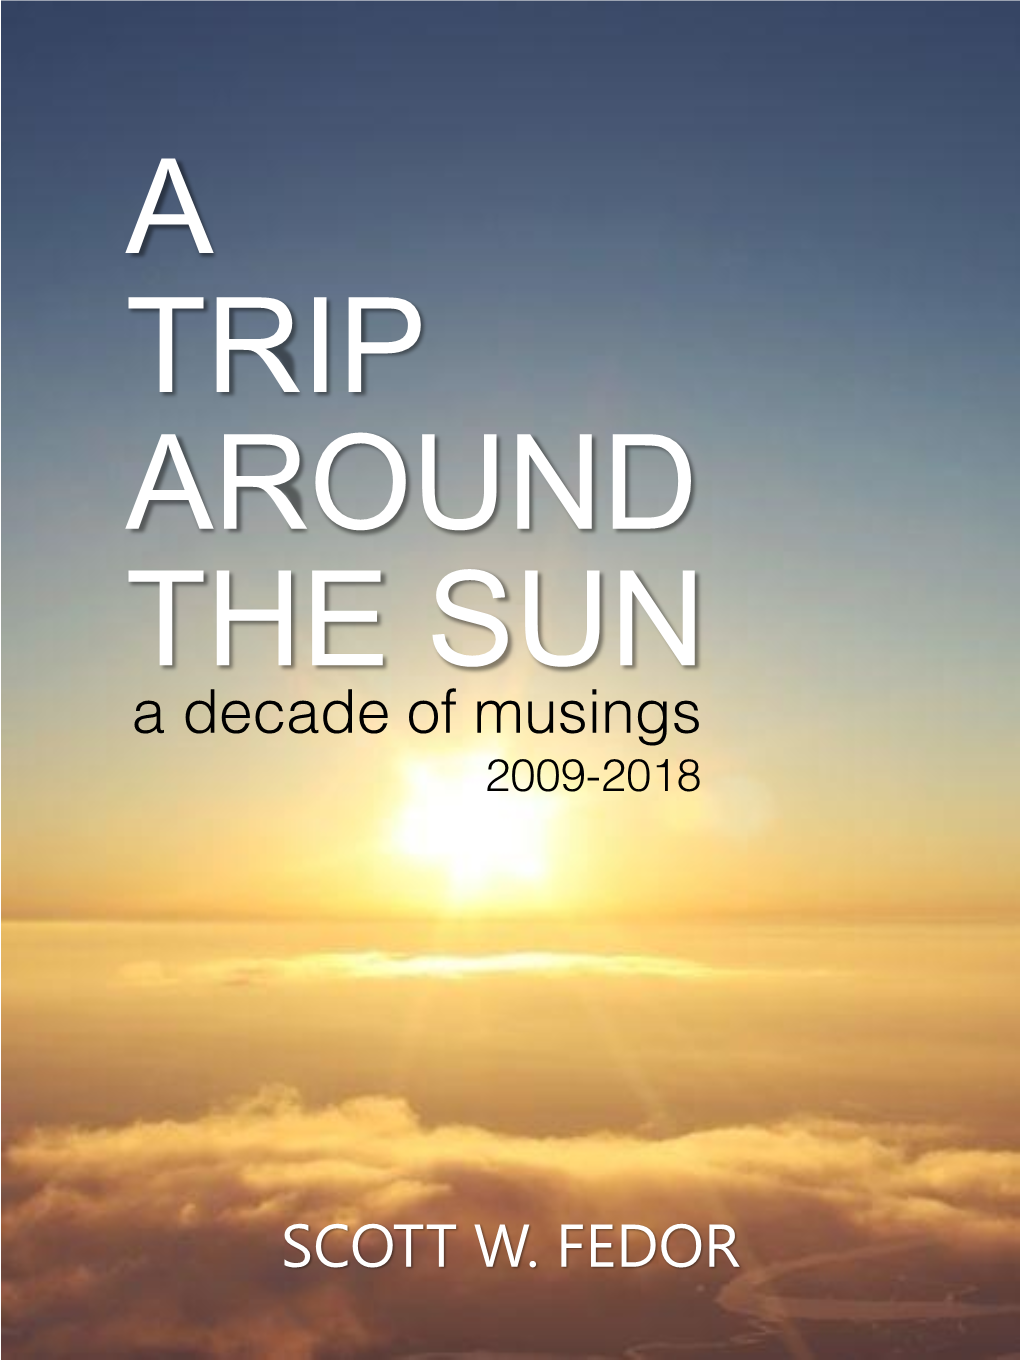 A TRIP AROUND the SUN a Decade of Musings 2009-2018